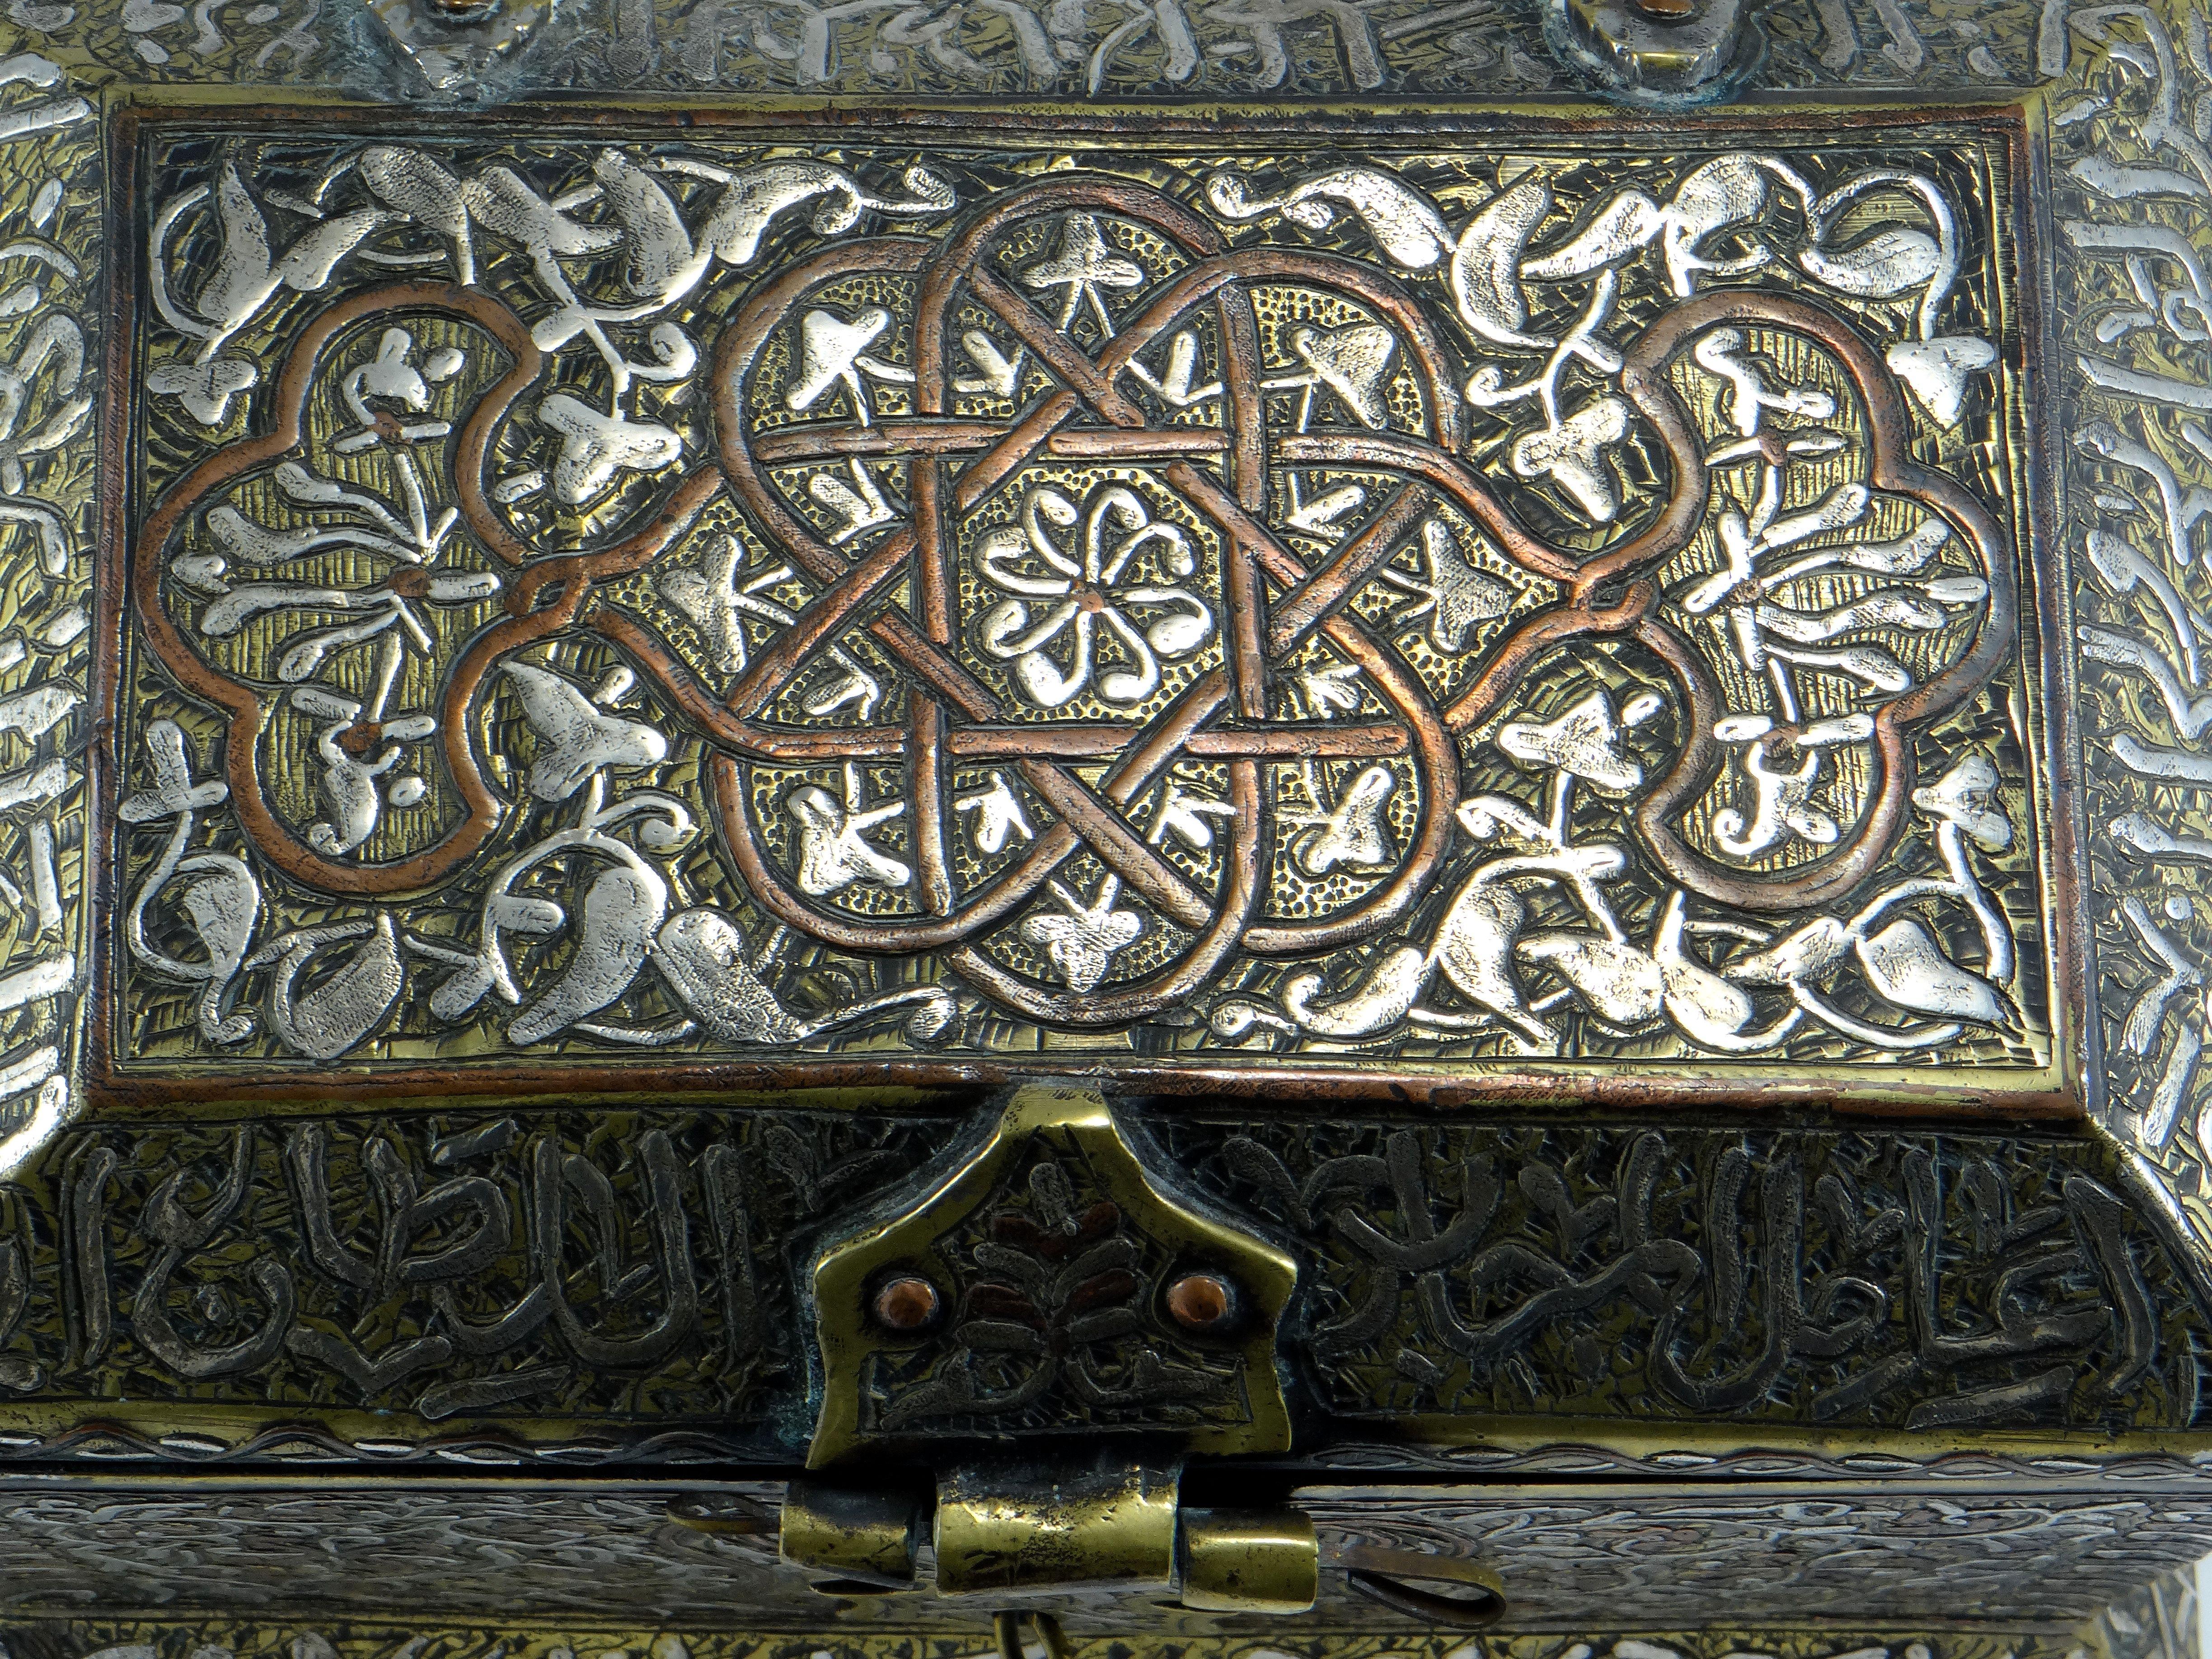 20th Century Bronze Box Inlaid with Silver and Copper, Syria, 1900s-1920s